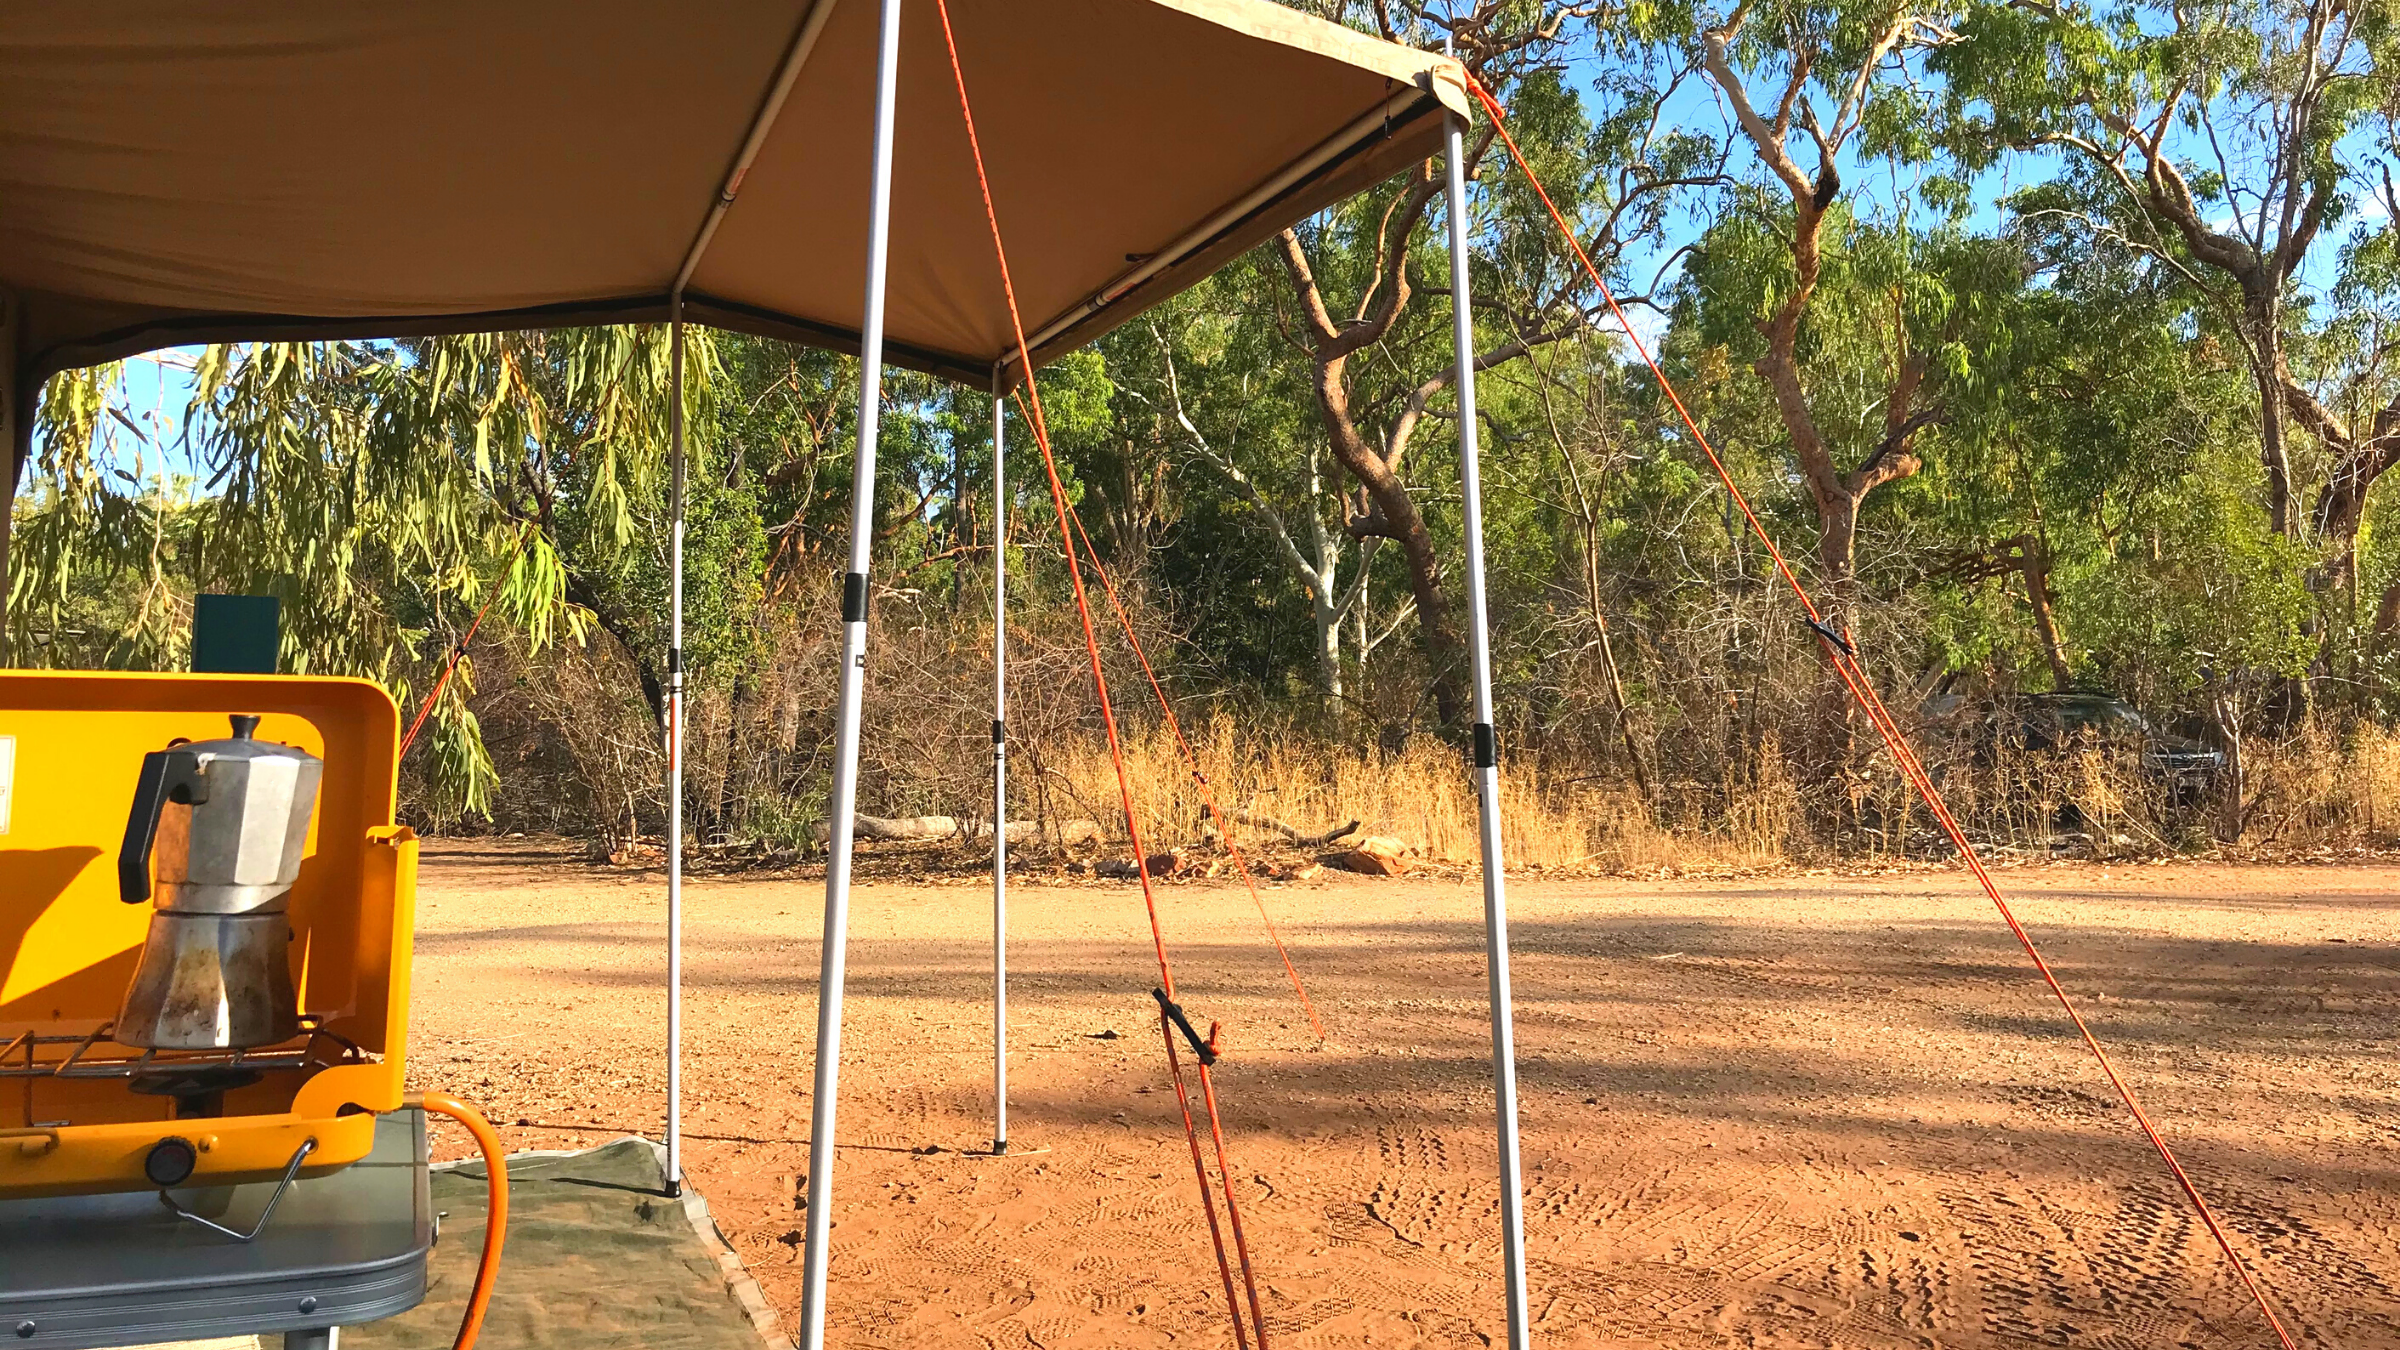 Destination4WD awnings to extend your shade in Australia, Lawn Hill Gorge North Western Qld